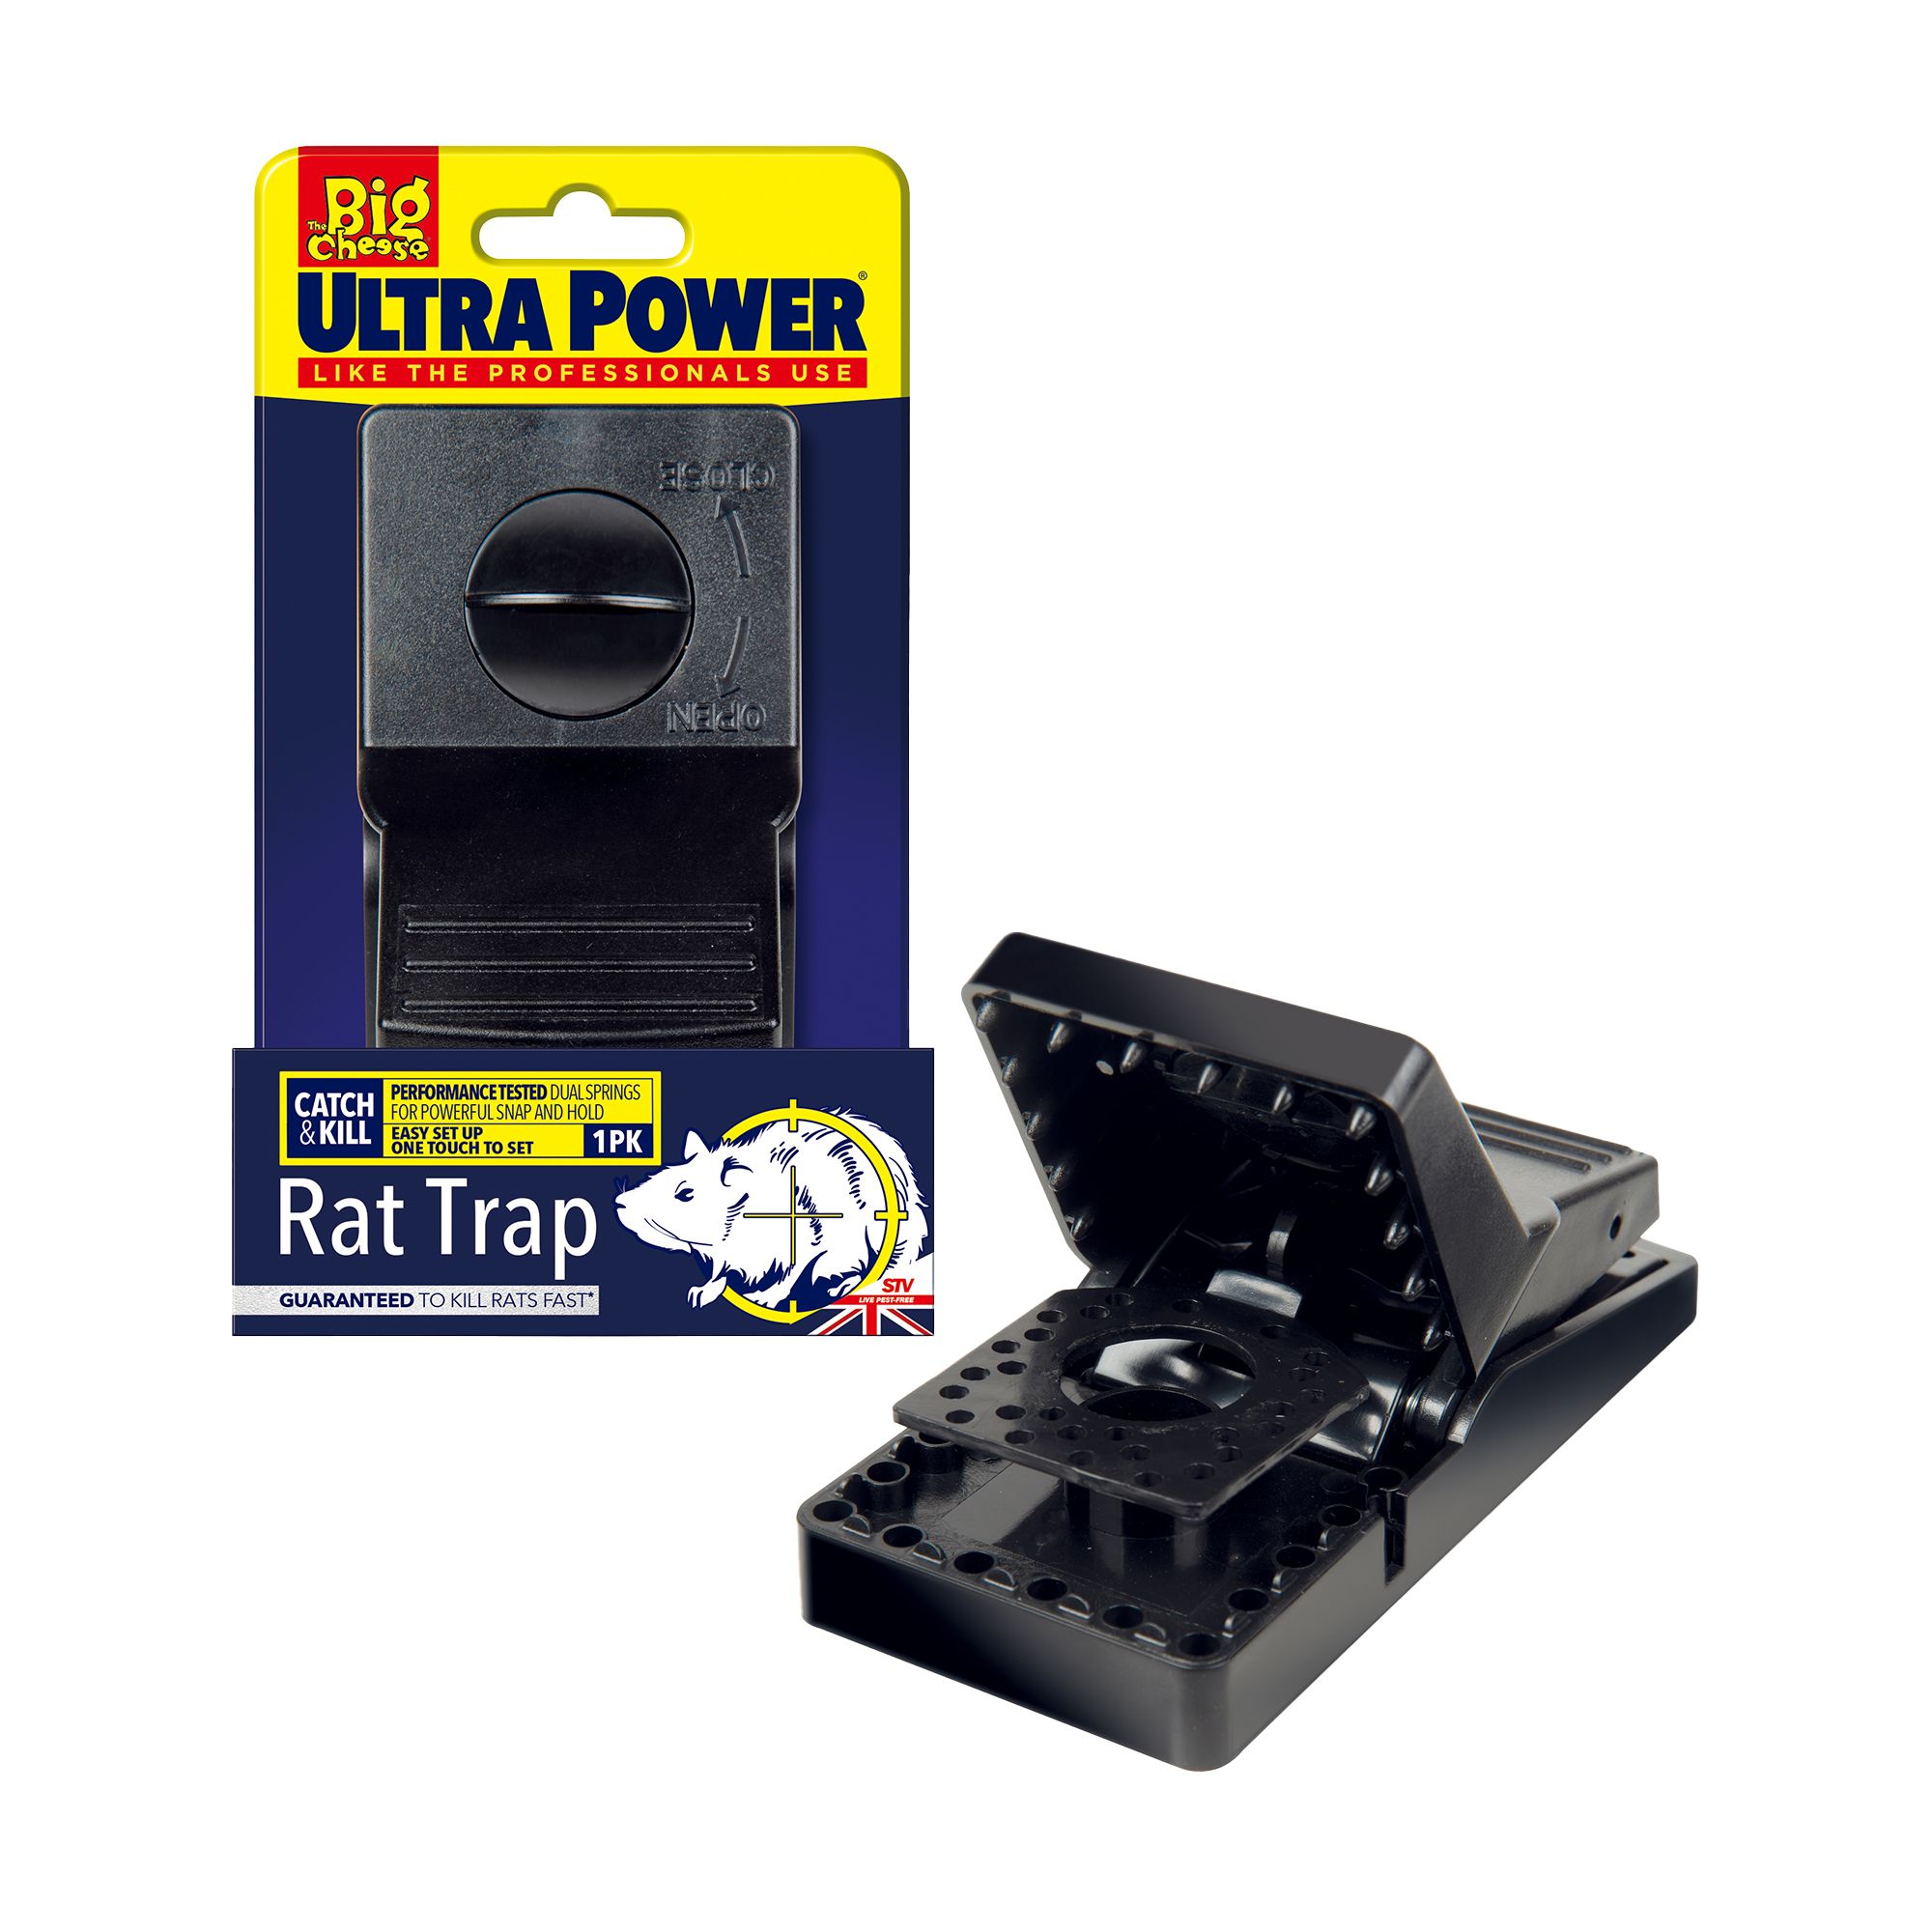 The Big Cheese Ultra Rat trap